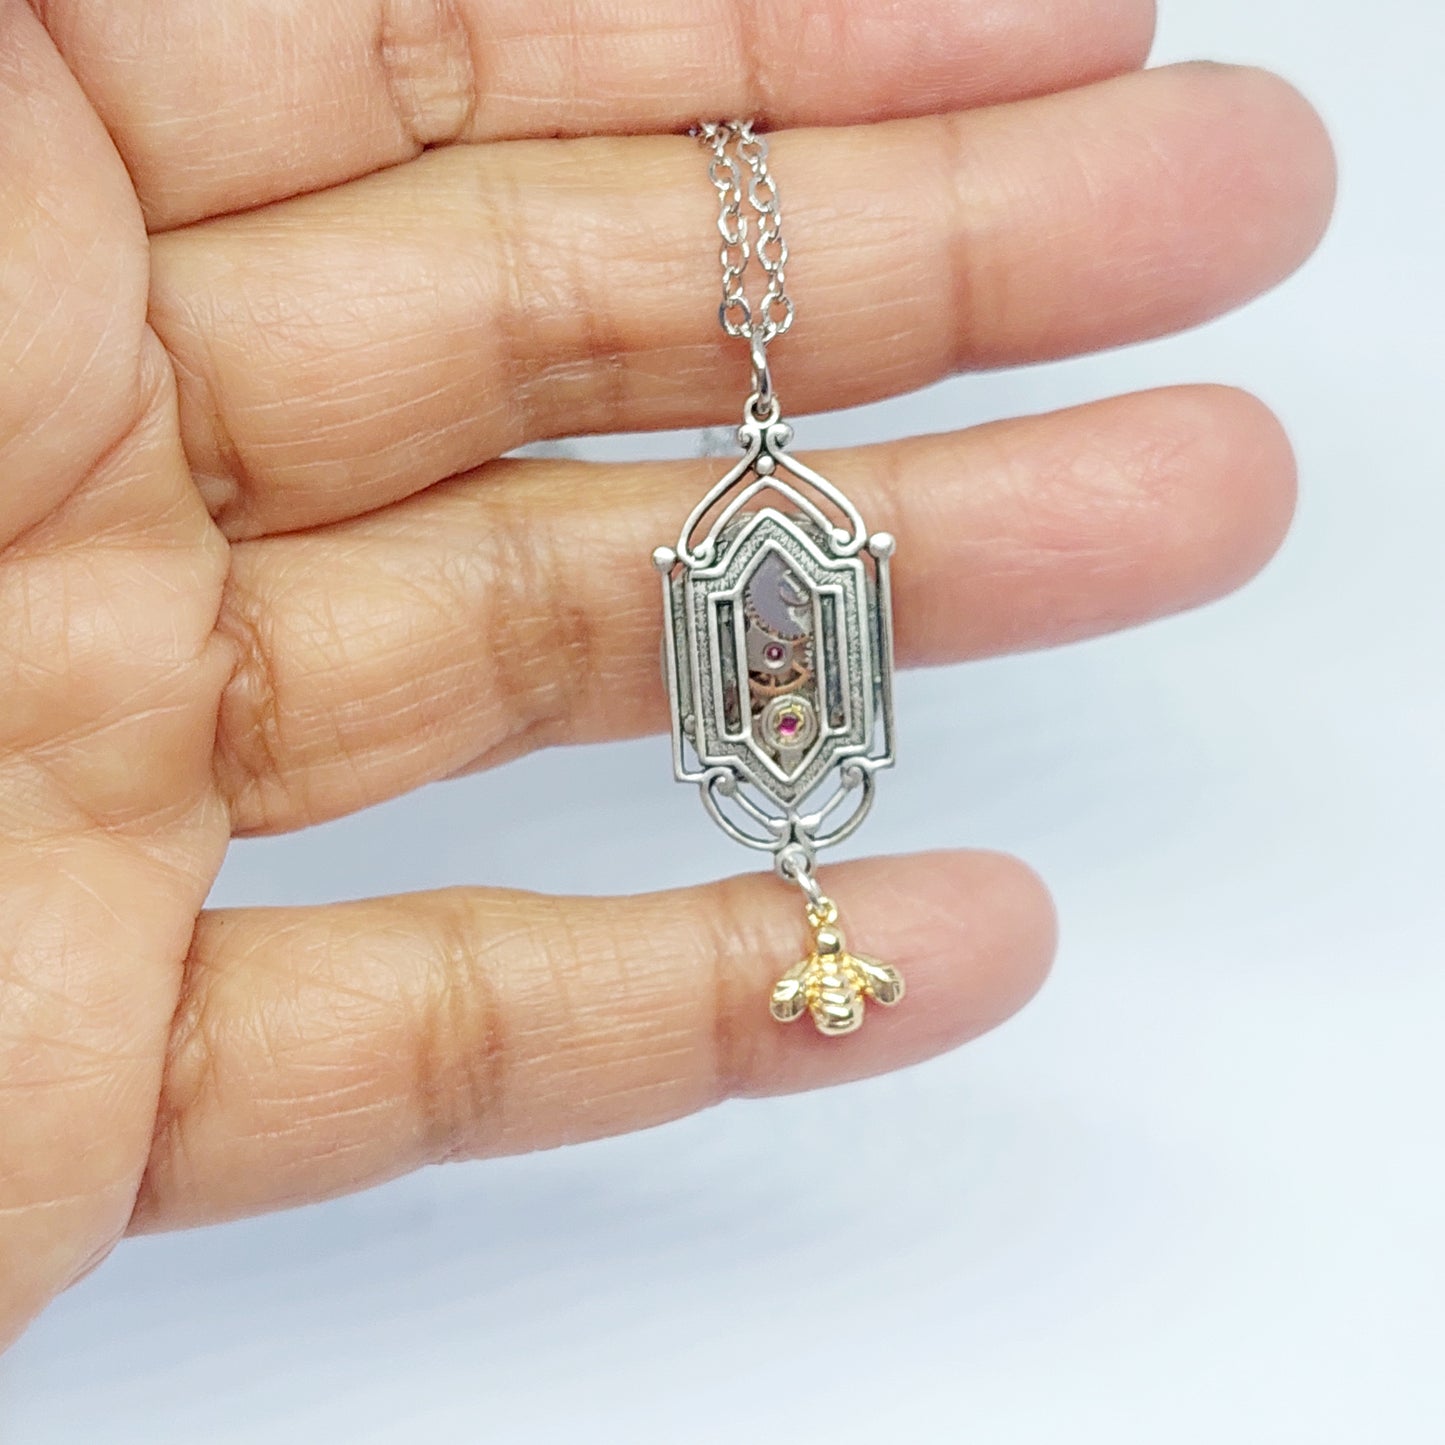 BESTSELLER! NEW!! Art Deco Window Pendant with vintage timepiece and gold bee